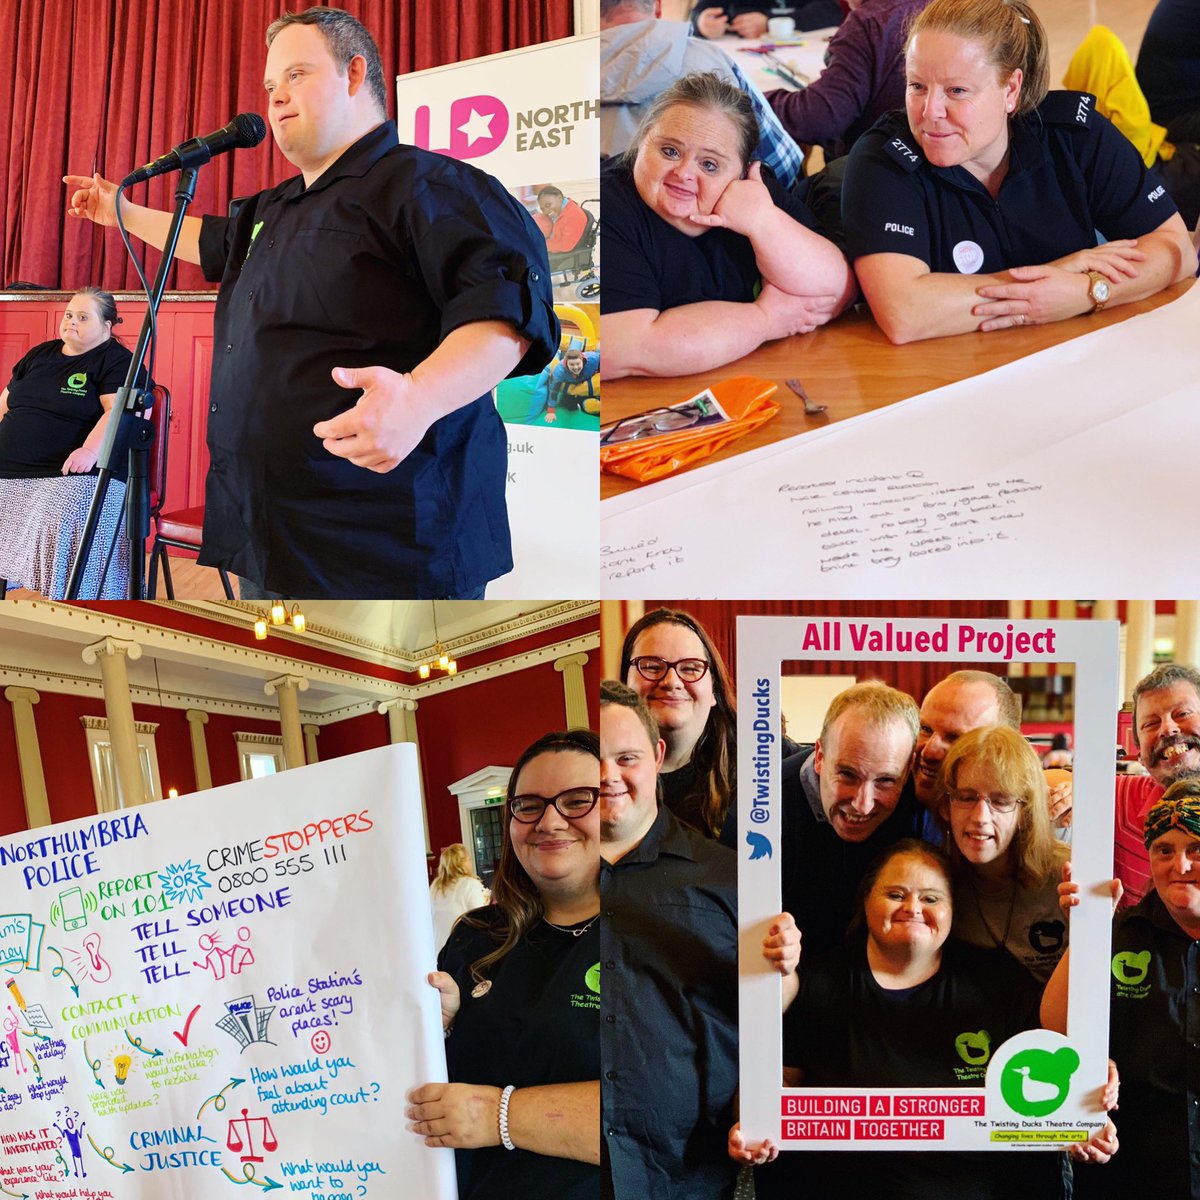 The Twisting Ducks delivered a presentation at @ldnortheast as part of our All Valued Project around #HateCrime, #MateCrime, #Radicalisation and #Extremism to support @northumbriapol to help fight against those issues in the North East of England. #learningdisabilities #autism